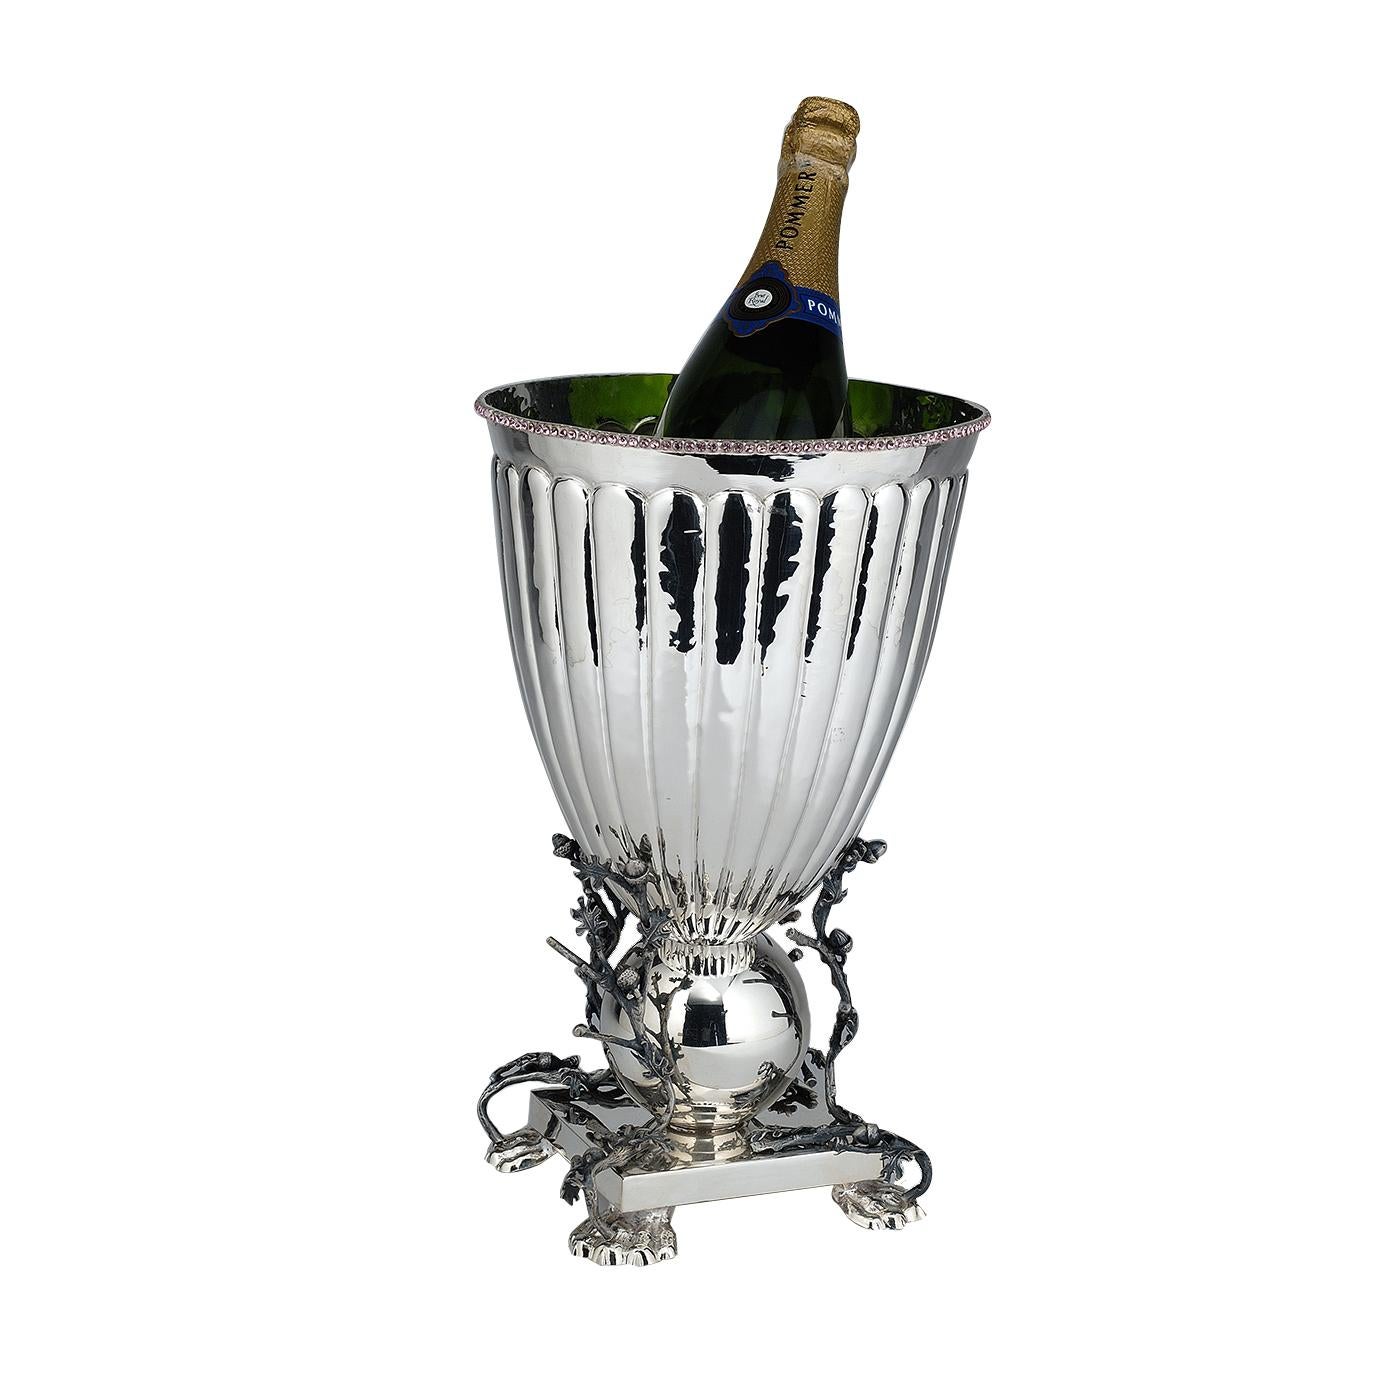 This elegant and timeless ice bucket can also be used to chill bottles of wine. Its classically inspired shape rests on a squared base that is supported by four lion paws. Its body is adorned at the bottom with a sphere that is decorated with